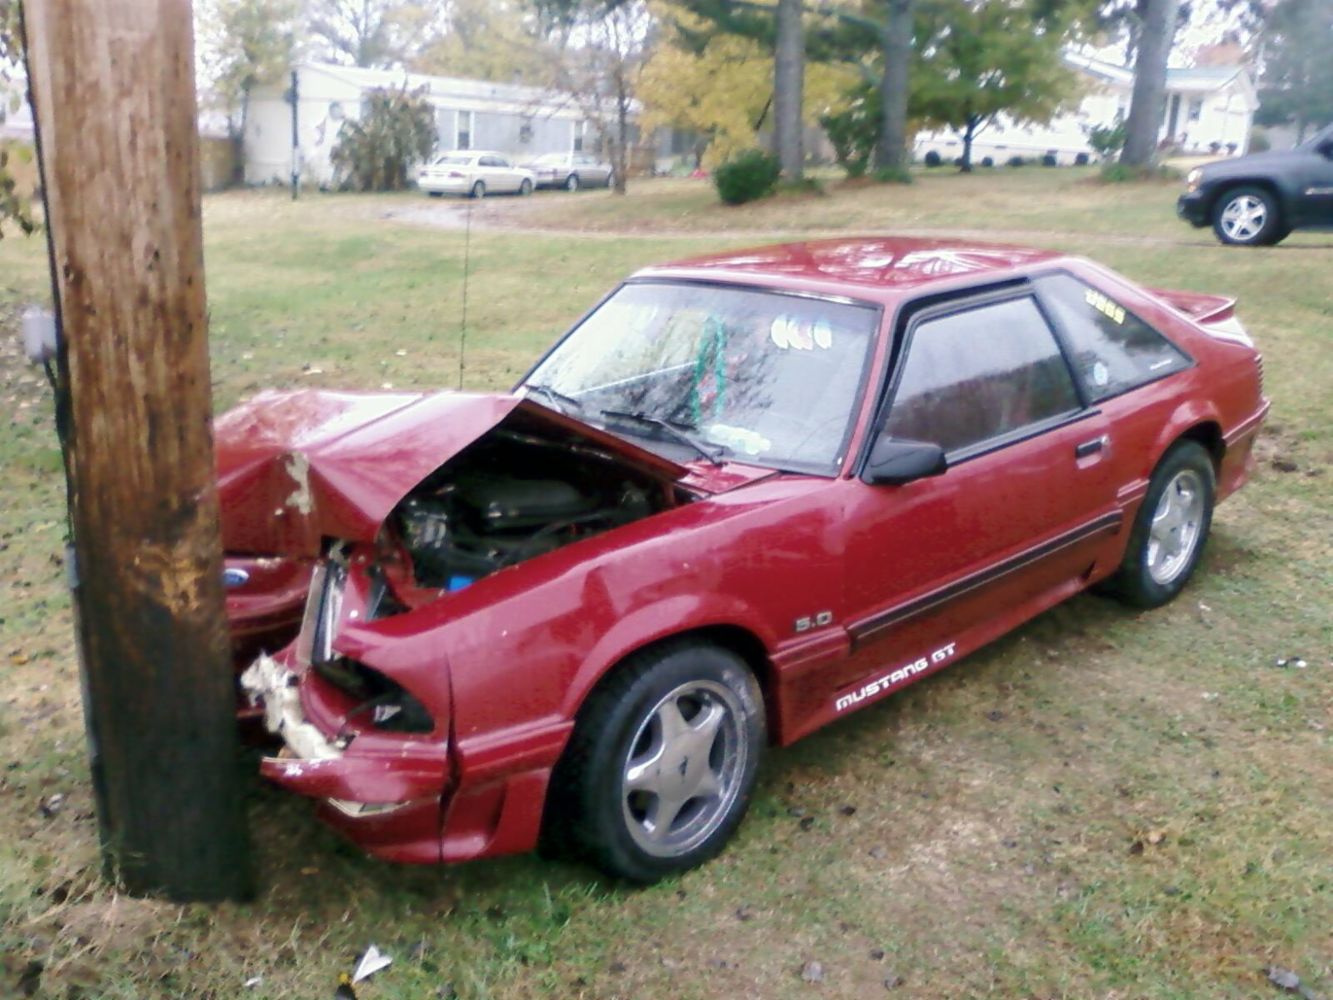 barbertonwreck1 100a61fbcea166f26621e709b9ac3aa5 1333x1000 - Tips Means Get Cash For Junk Cars